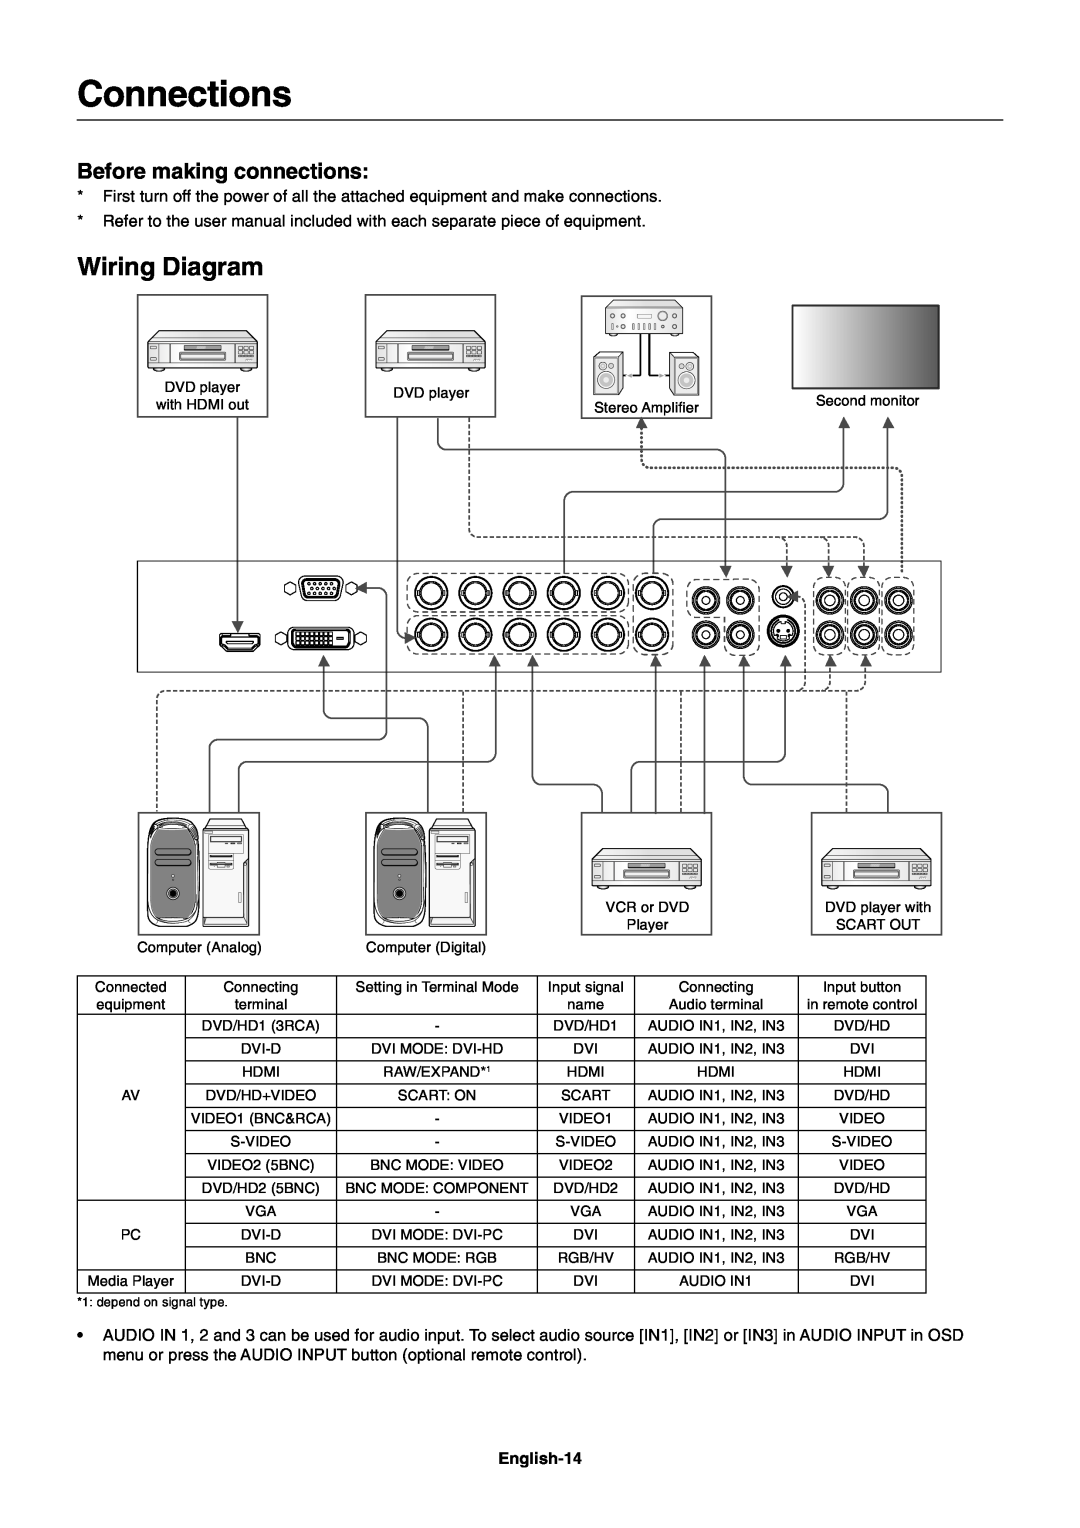 NEC X461UN user manual Connections, Wiring Diagram, Before making connections 